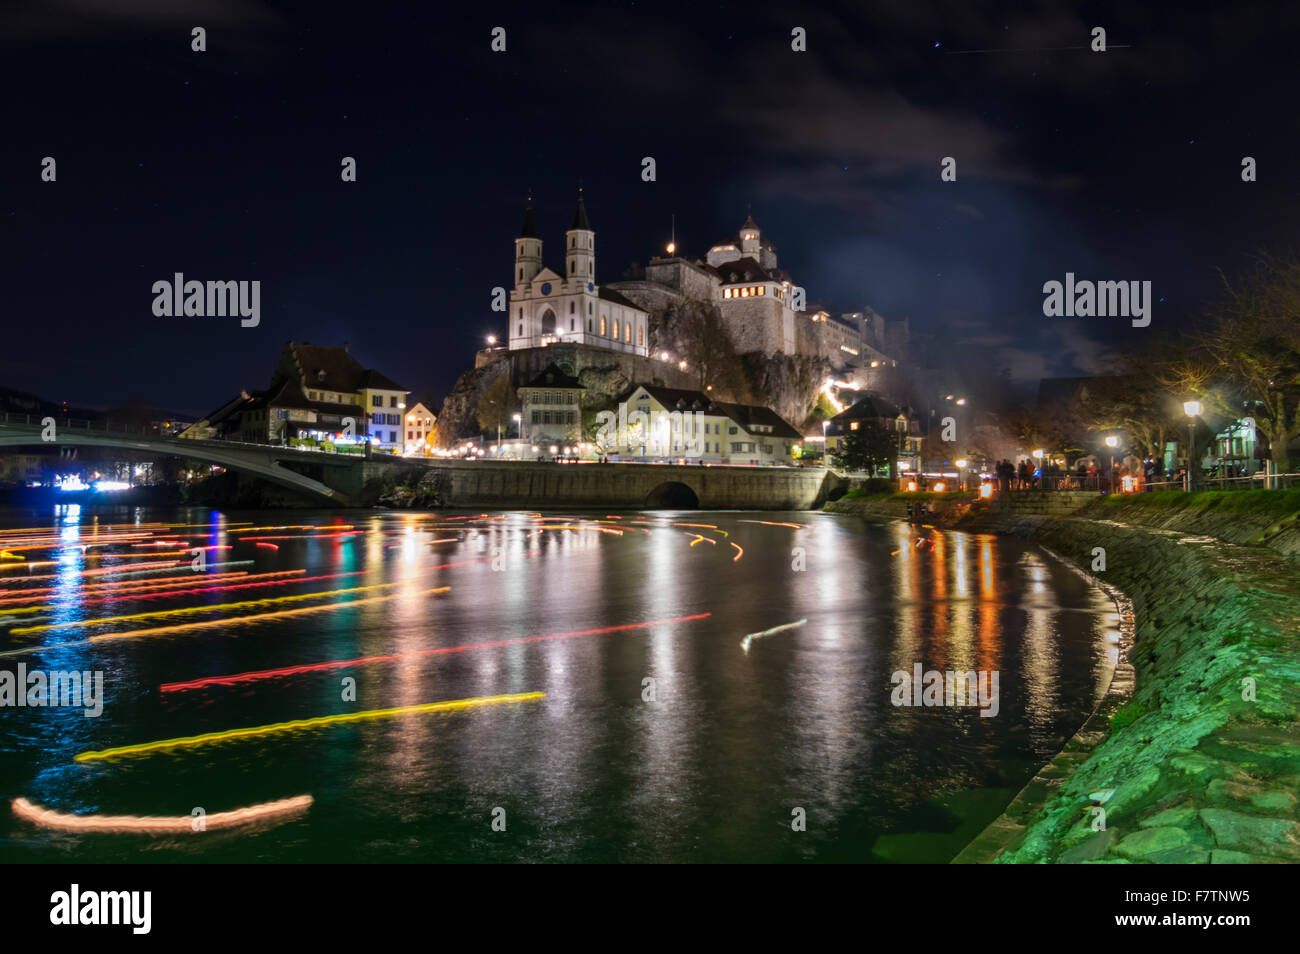 Church and fortress of the town of Aarburg, Switzerland, at night, during the 'Aarburg leuchtet' Christmas event. Floating candles on Aare river. Stock Photo